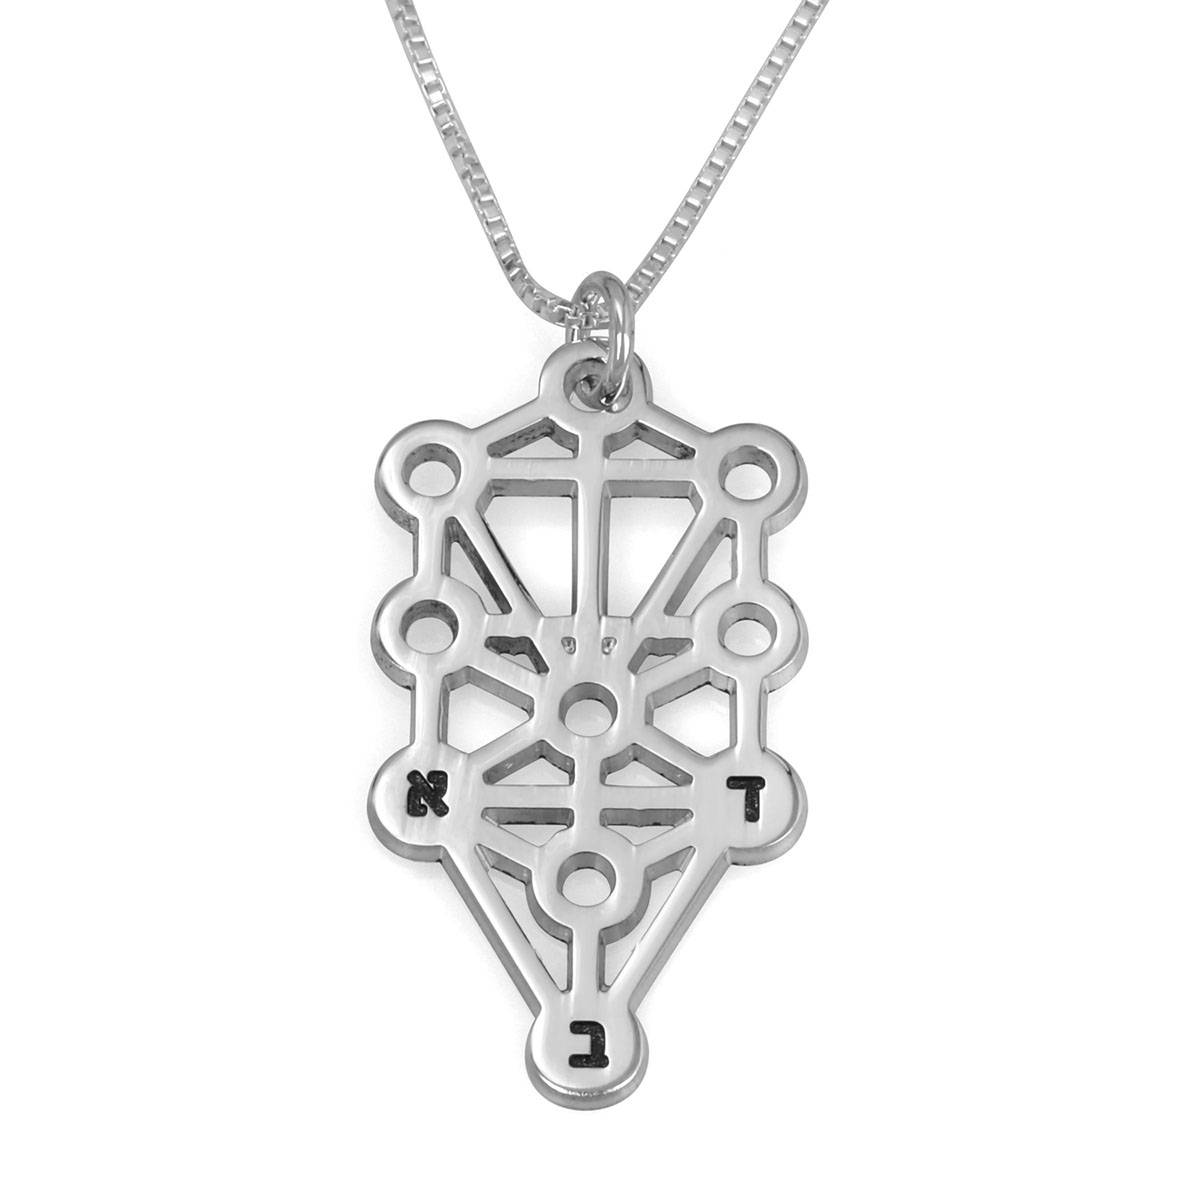 Sterling Silver Kabbalah Tree of Life Necklace with Three Initials - 1